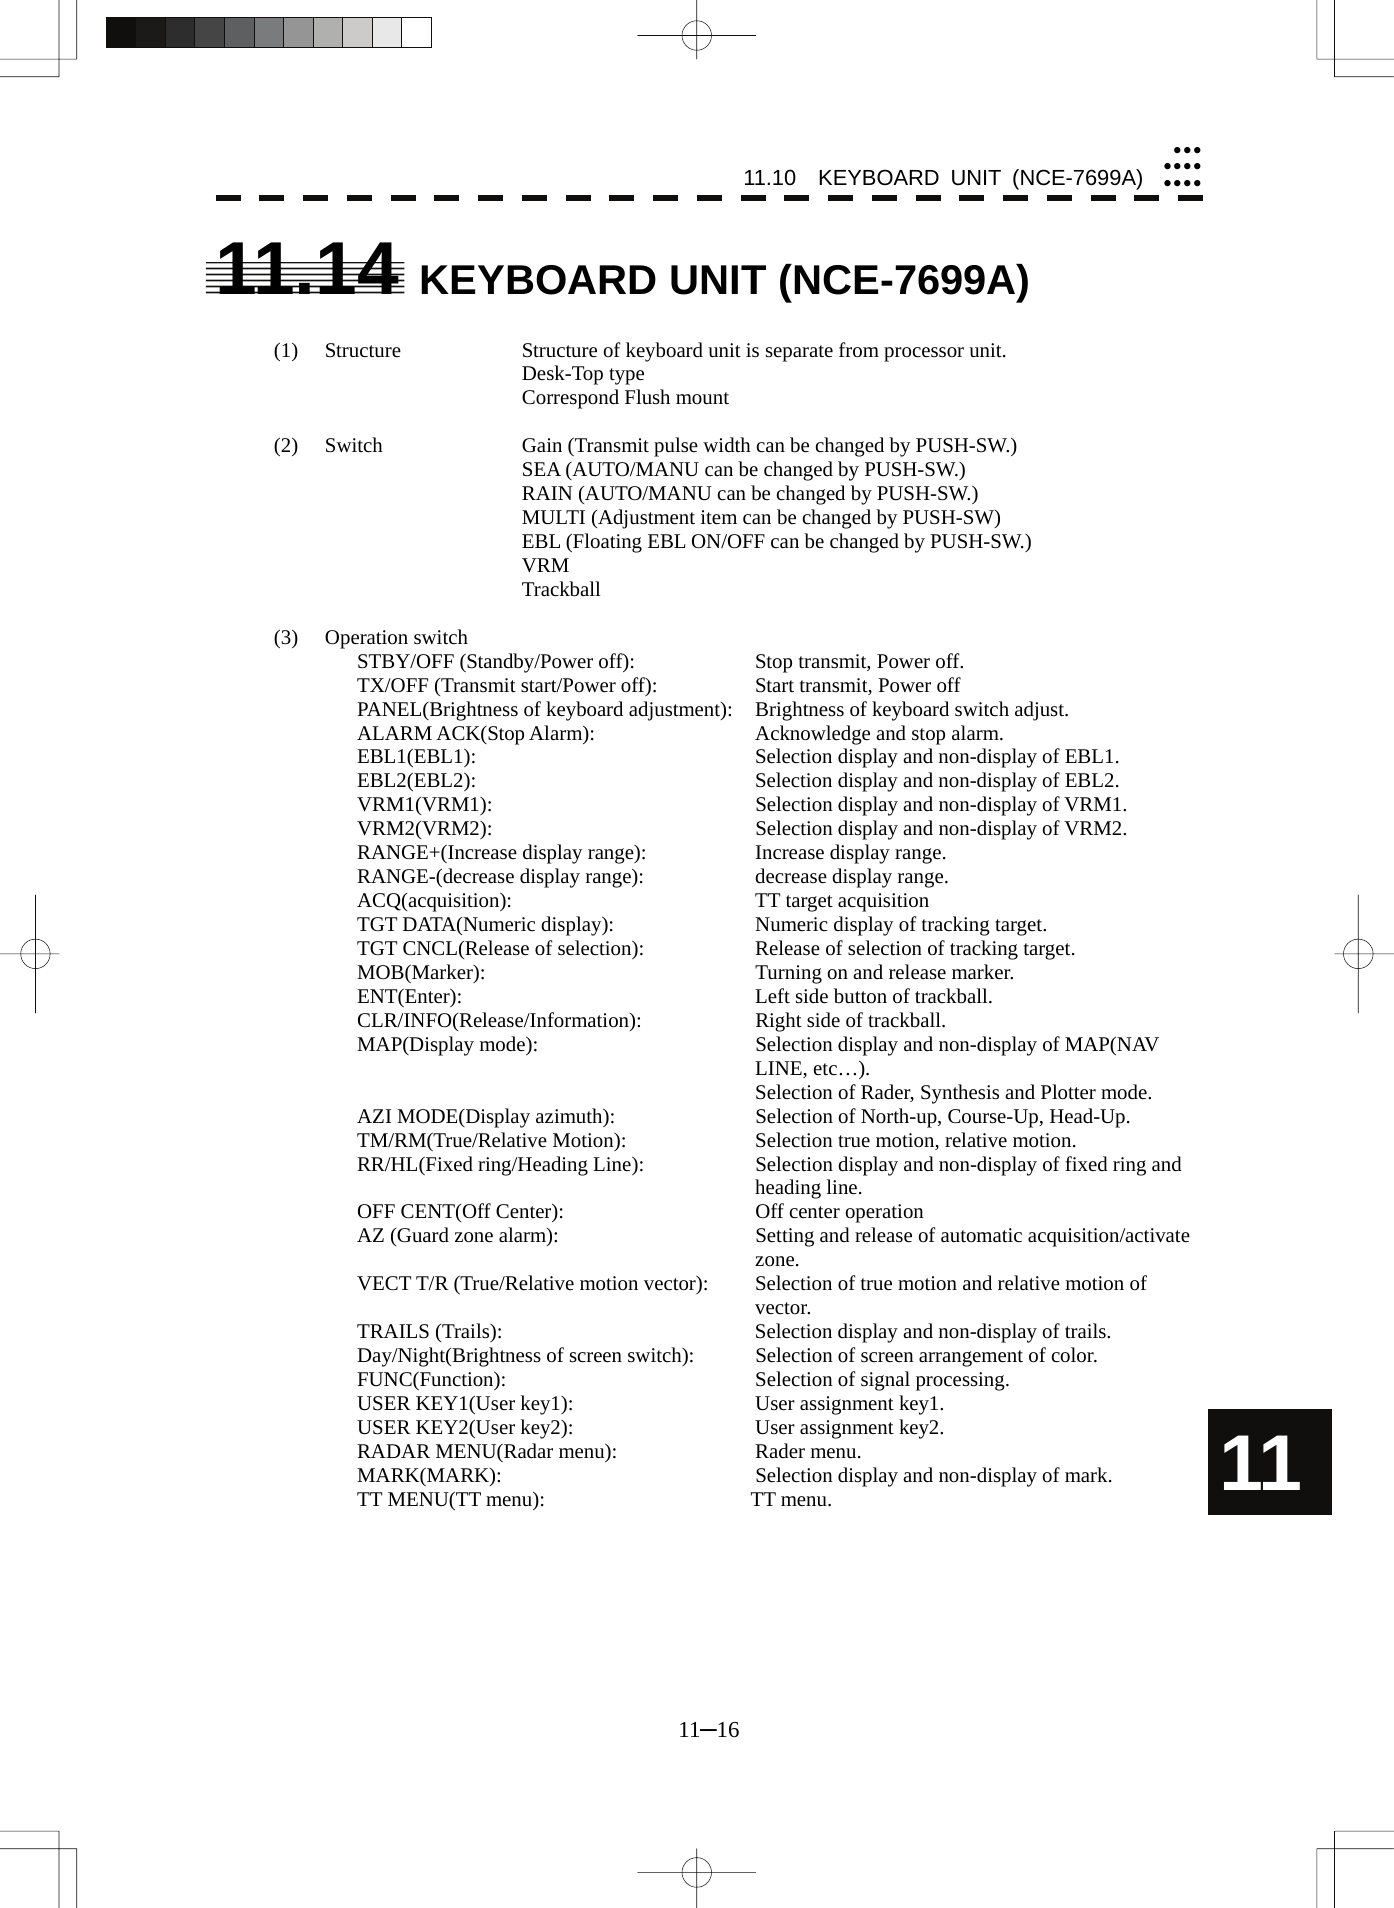 11.10  KEYBOARD UNIT (NCE-7699A) 11─16 yyyyyyyyyyy11 11.14 KEYBOARD UNIT (NCE-7699A)  (1)  Structure  Structure of keyboard unit is separate from processor unit.    Desk-Top type     Correspond Flush mount    (2)  Switch  Gain (Transmit pulse width can be changed by PUSH-SW.)     SEA (AUTO/MANU can be changed by PUSH-SW.)     RAIN (AUTO/MANU can be changed by PUSH-SW.)     MULTI (Adjustment item can be changed by PUSH-SW)     EBL (Floating EBL ON/OFF can be changed by PUSH-SW.)    VRM    Trackball  (3) Operation switch STBY/OFF (Standby/Power off):    Stop transmit, Power off. TX/OFF (Transmit start/Power off):    Start transmit, Power off PANEL(Brightness of keyboard adjustment):  Brightness of keyboard switch adjust. ALARM ACK(Stop Alarm):    Acknowledge and stop alarm. EBL1(EBL1):    Selection display and non-display of EBL1. EBL2(EBL2):    Selection display and non-display of EBL2. VRM1(VRM1):    Selection display and non-display of VRM1. VRM2(VRM2):    Selection display and non-display of VRM2. RANGE+(Increase display range):    Increase display range. RANGE-(decrease display range):    decrease display range. ACQ(acquisition):    TT target acquisition TGT DATA(Numeric display):    Numeric display of tracking target. TGT CNCL(Release of selection):    Release of selection of tracking target. MOB(Marker):    Turning on and release marker. ENT(Enter):    Left side button of trackball. CLR/INFO(Release/Information):    Right side of trackball. MAP(Display mode):  Selection display and non-display of MAP(NAV LINE, etc…).   Selection of Rader, Synthesis and Plotter mode. AZI MODE(Display azimuth):    Selection of North-up, Course-Up, Head-Up. TM/RM(True/Relative Motion):    Selection true motion, relative motion. RR/HL(Fixed ring/Heading Line):  Selection display and non-display of fixed ring and heading line. OFF CENT(Off Center):  Off center operation AZ (Guard zone alarm):    Setting and release of automatic acquisition/activate zone. VECT T/R (True/Relative motion vector):  Selection of true motion and relative motion of vector. TRAILS (Trails):  Selection display and non-display of trails. Day/Night(Brightness of screen switch):  Selection of screen arrangement of color. FUNC(Function):  Selection of signal processing. USER KEY1(User key1):    User assignment key1. USER KEY2(User key2):    User assignment key2. RADAR MENU(Radar menu):    Rader menu. MARK(MARK):    Selection display and non-display of mark. TT MENU(TT menu):        TT menu.   